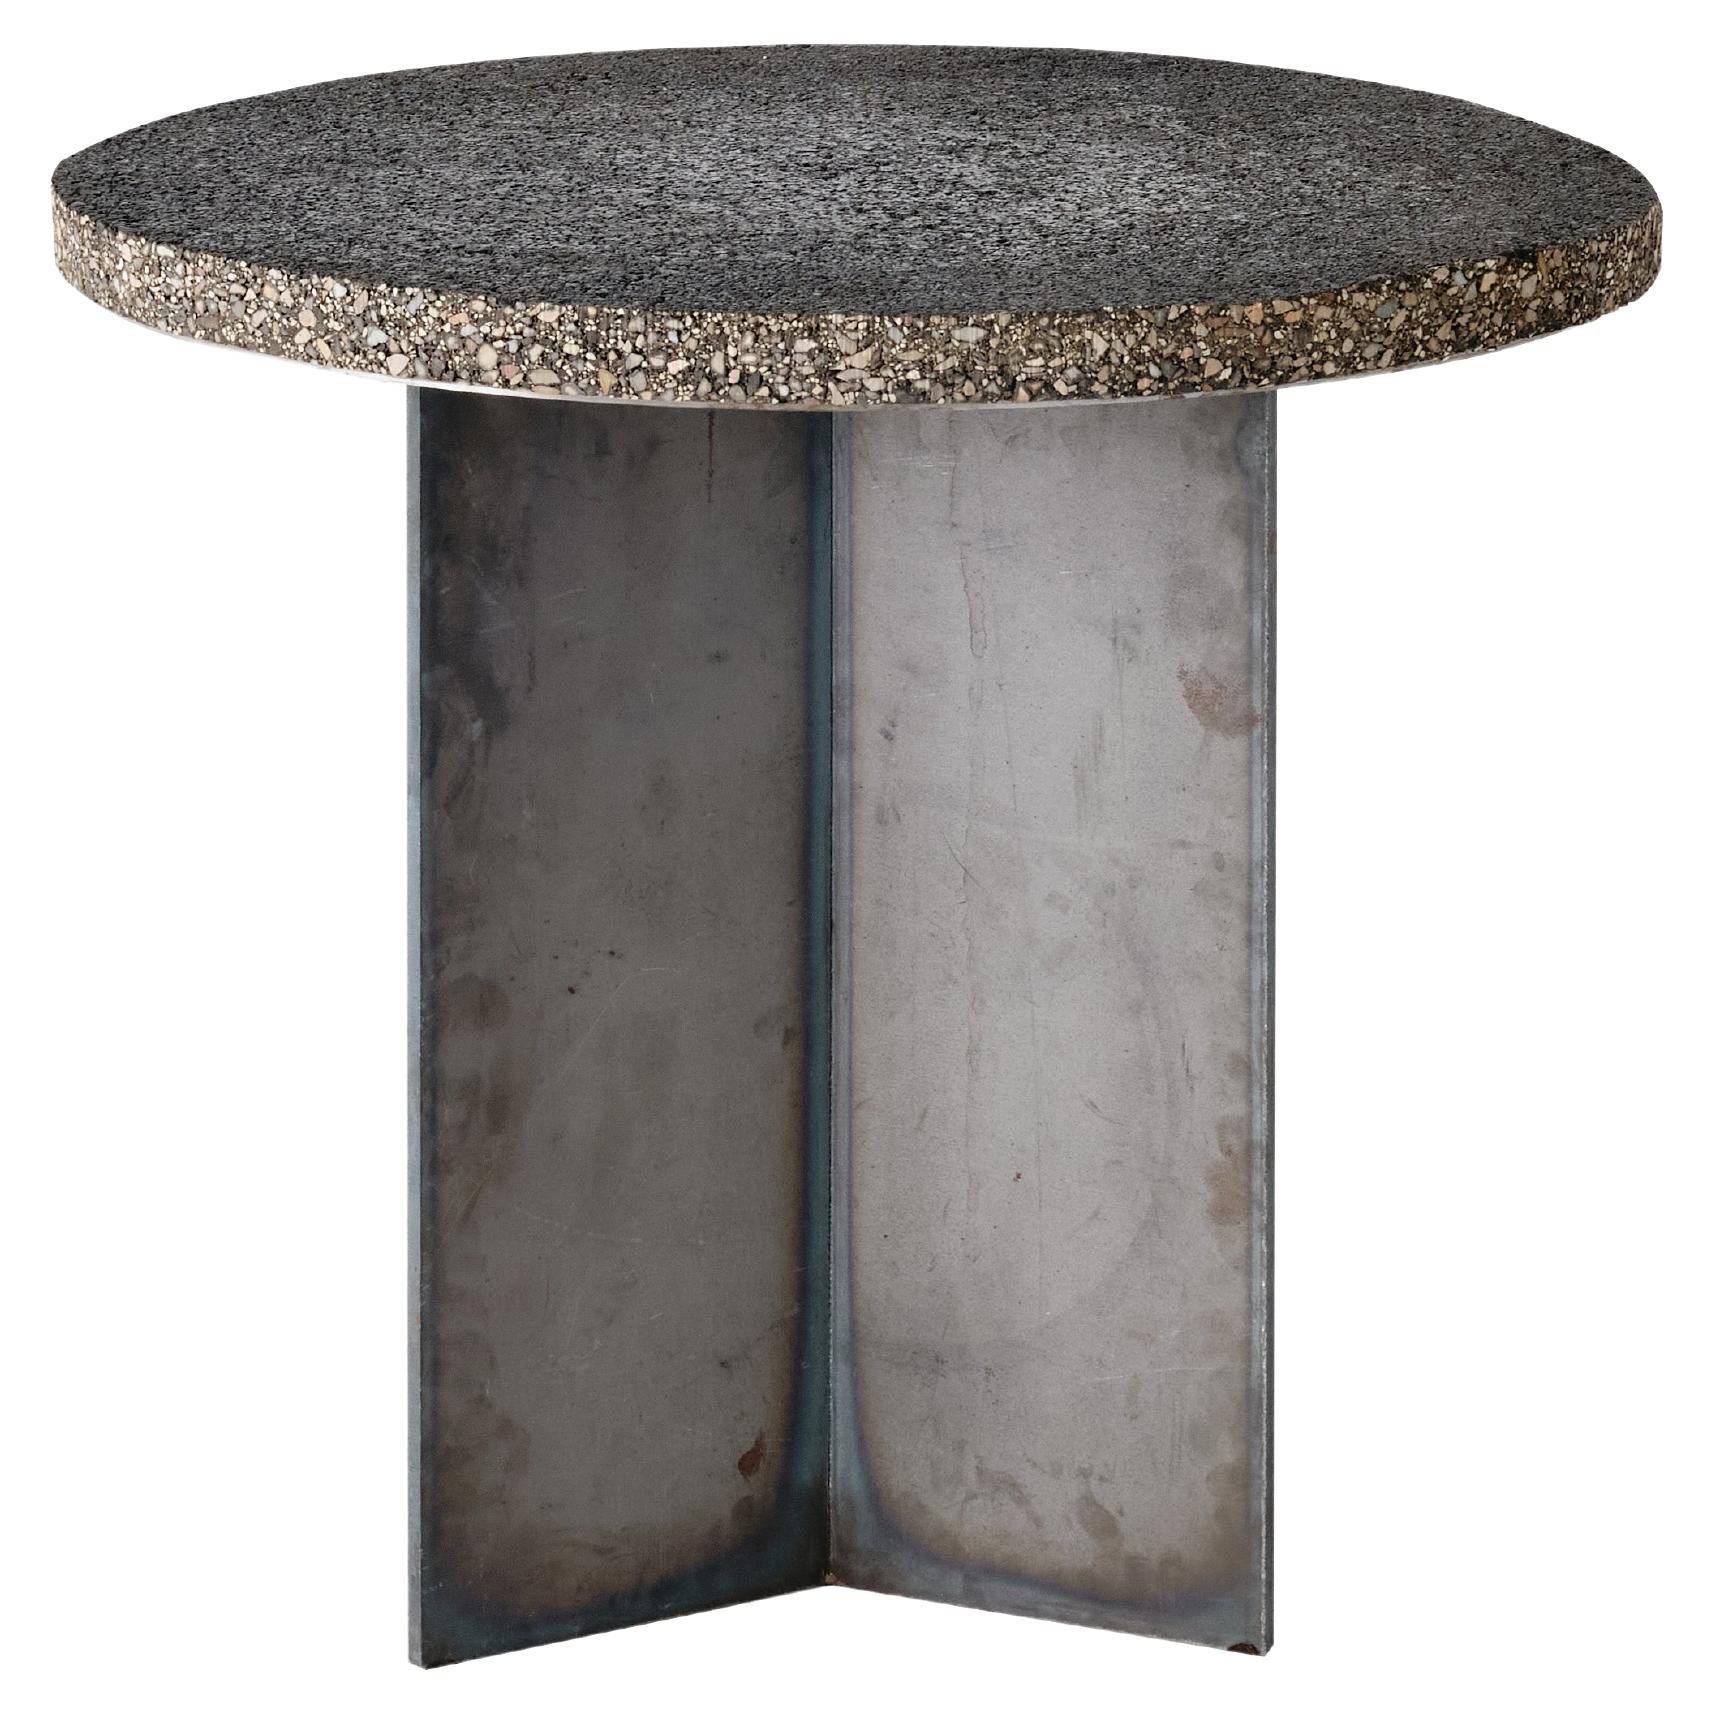 Temporal Collection, Limited Edition, Tarmac Table by Lucas Muñoz Muñoz For Sale